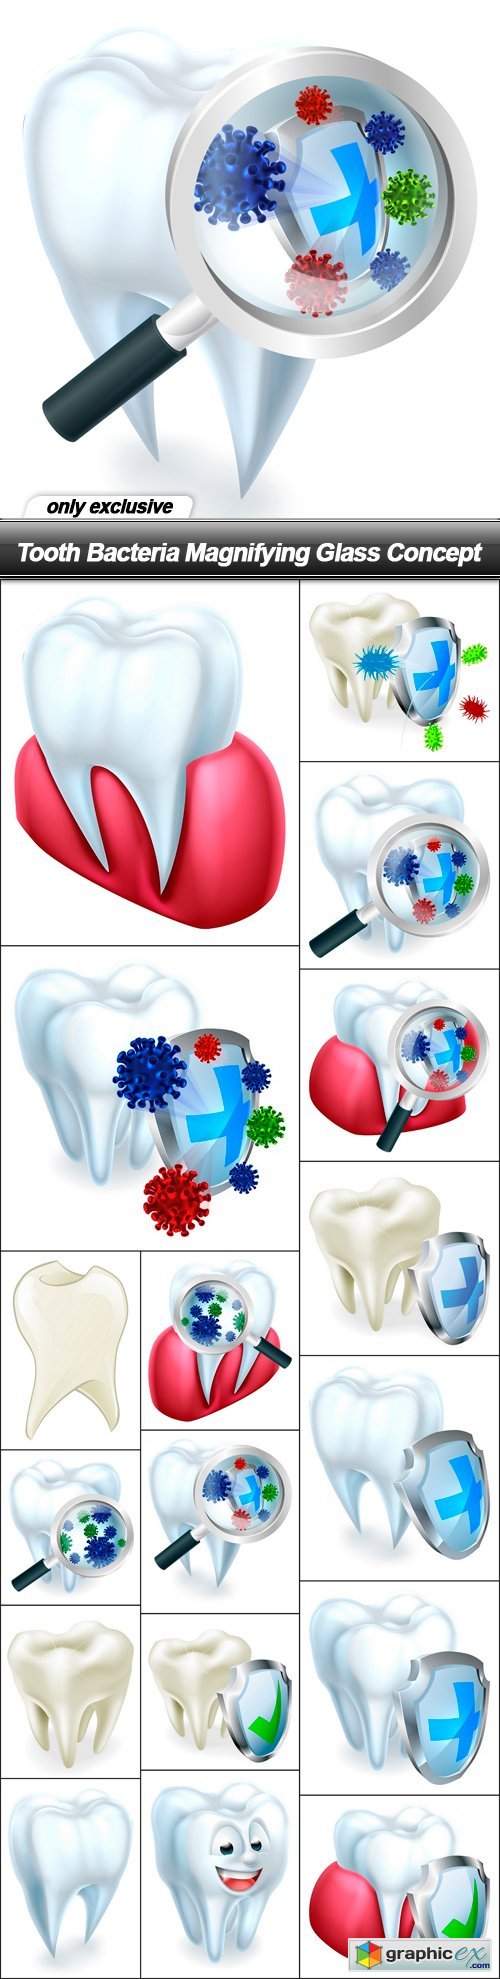 Tooth Bacteria Magnifying Glass Concept - 17 EPS